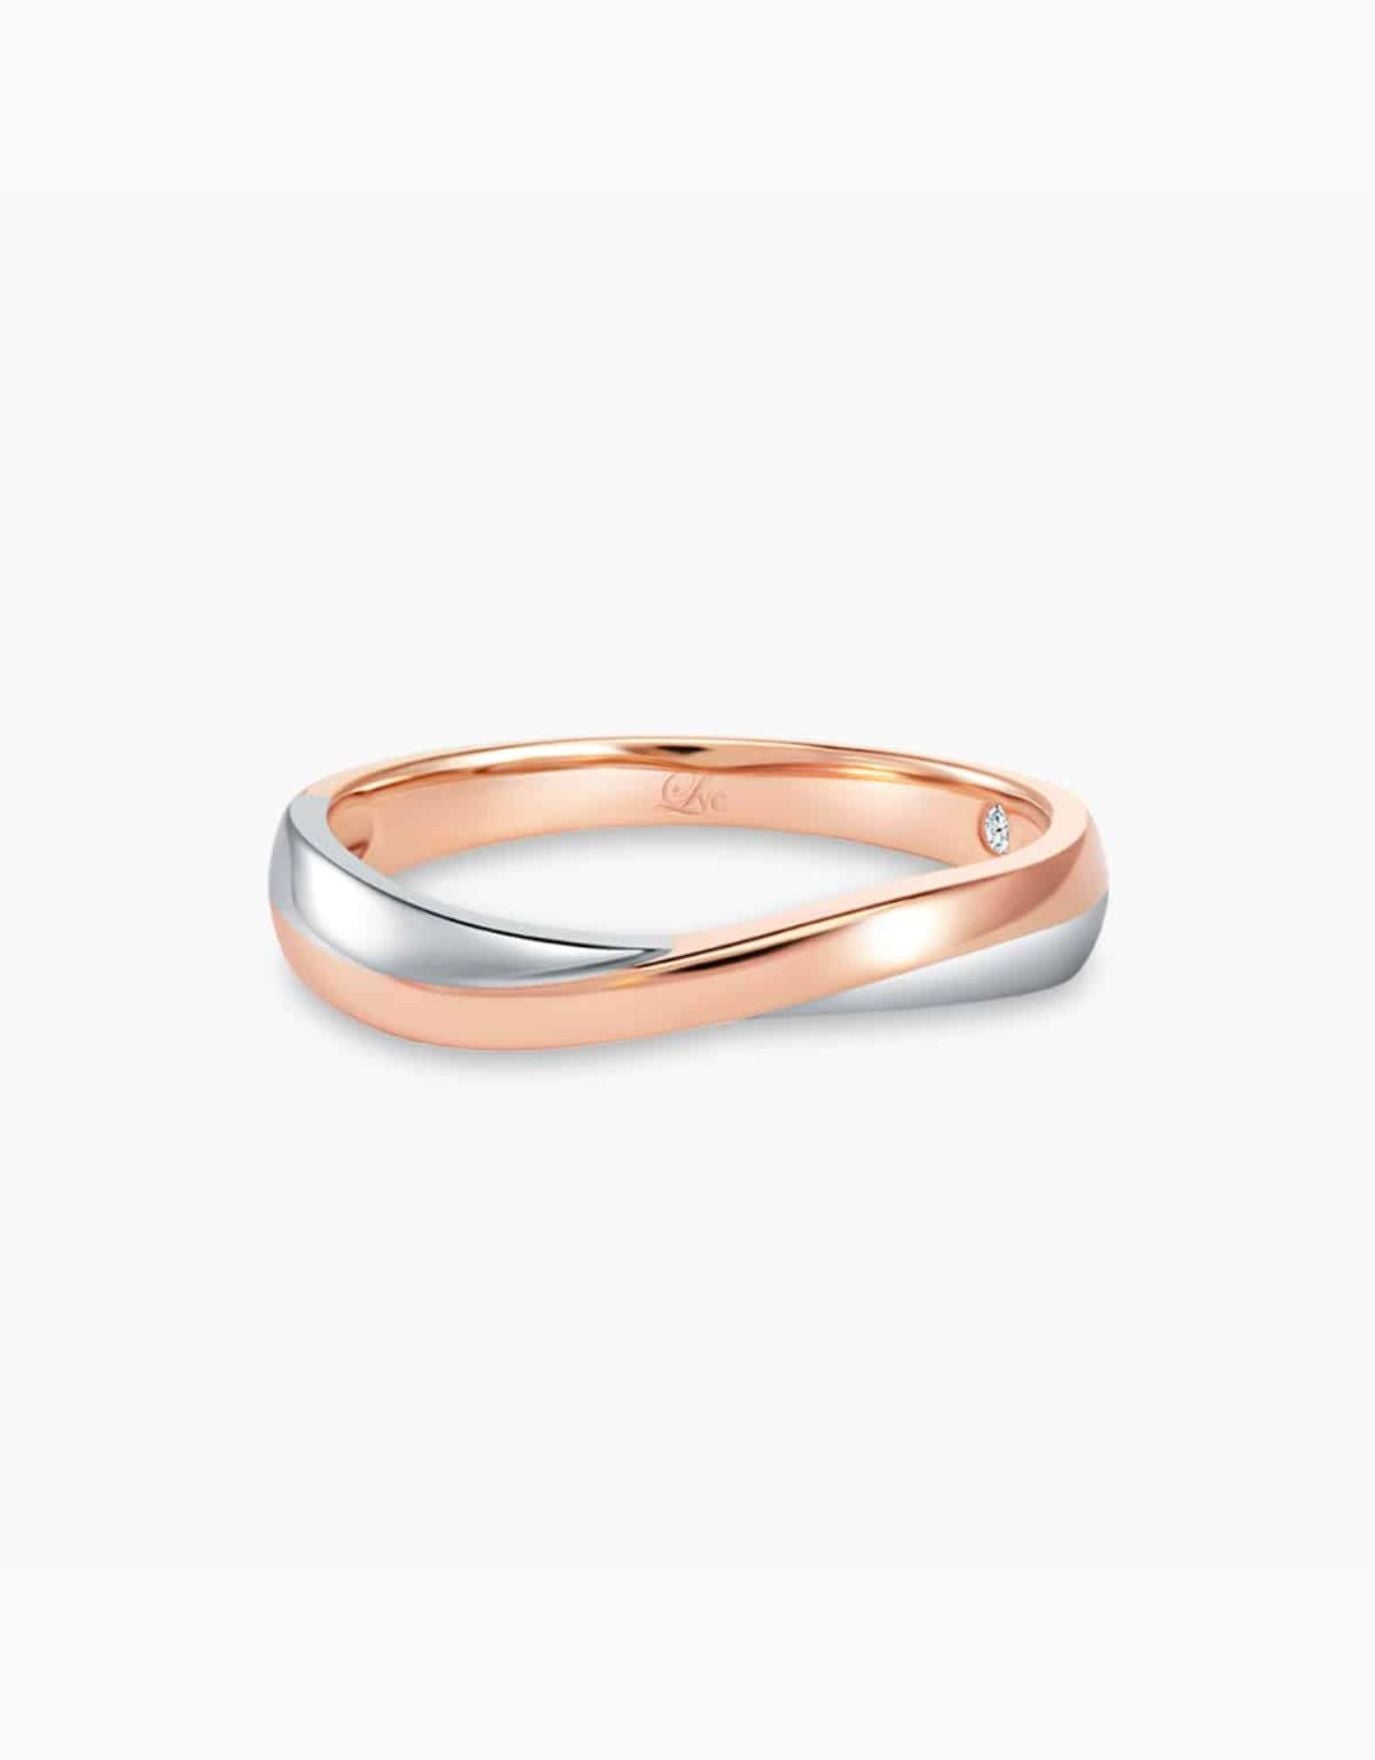 LVC Perfection Bliss Wedding Band in White and Rose Gold